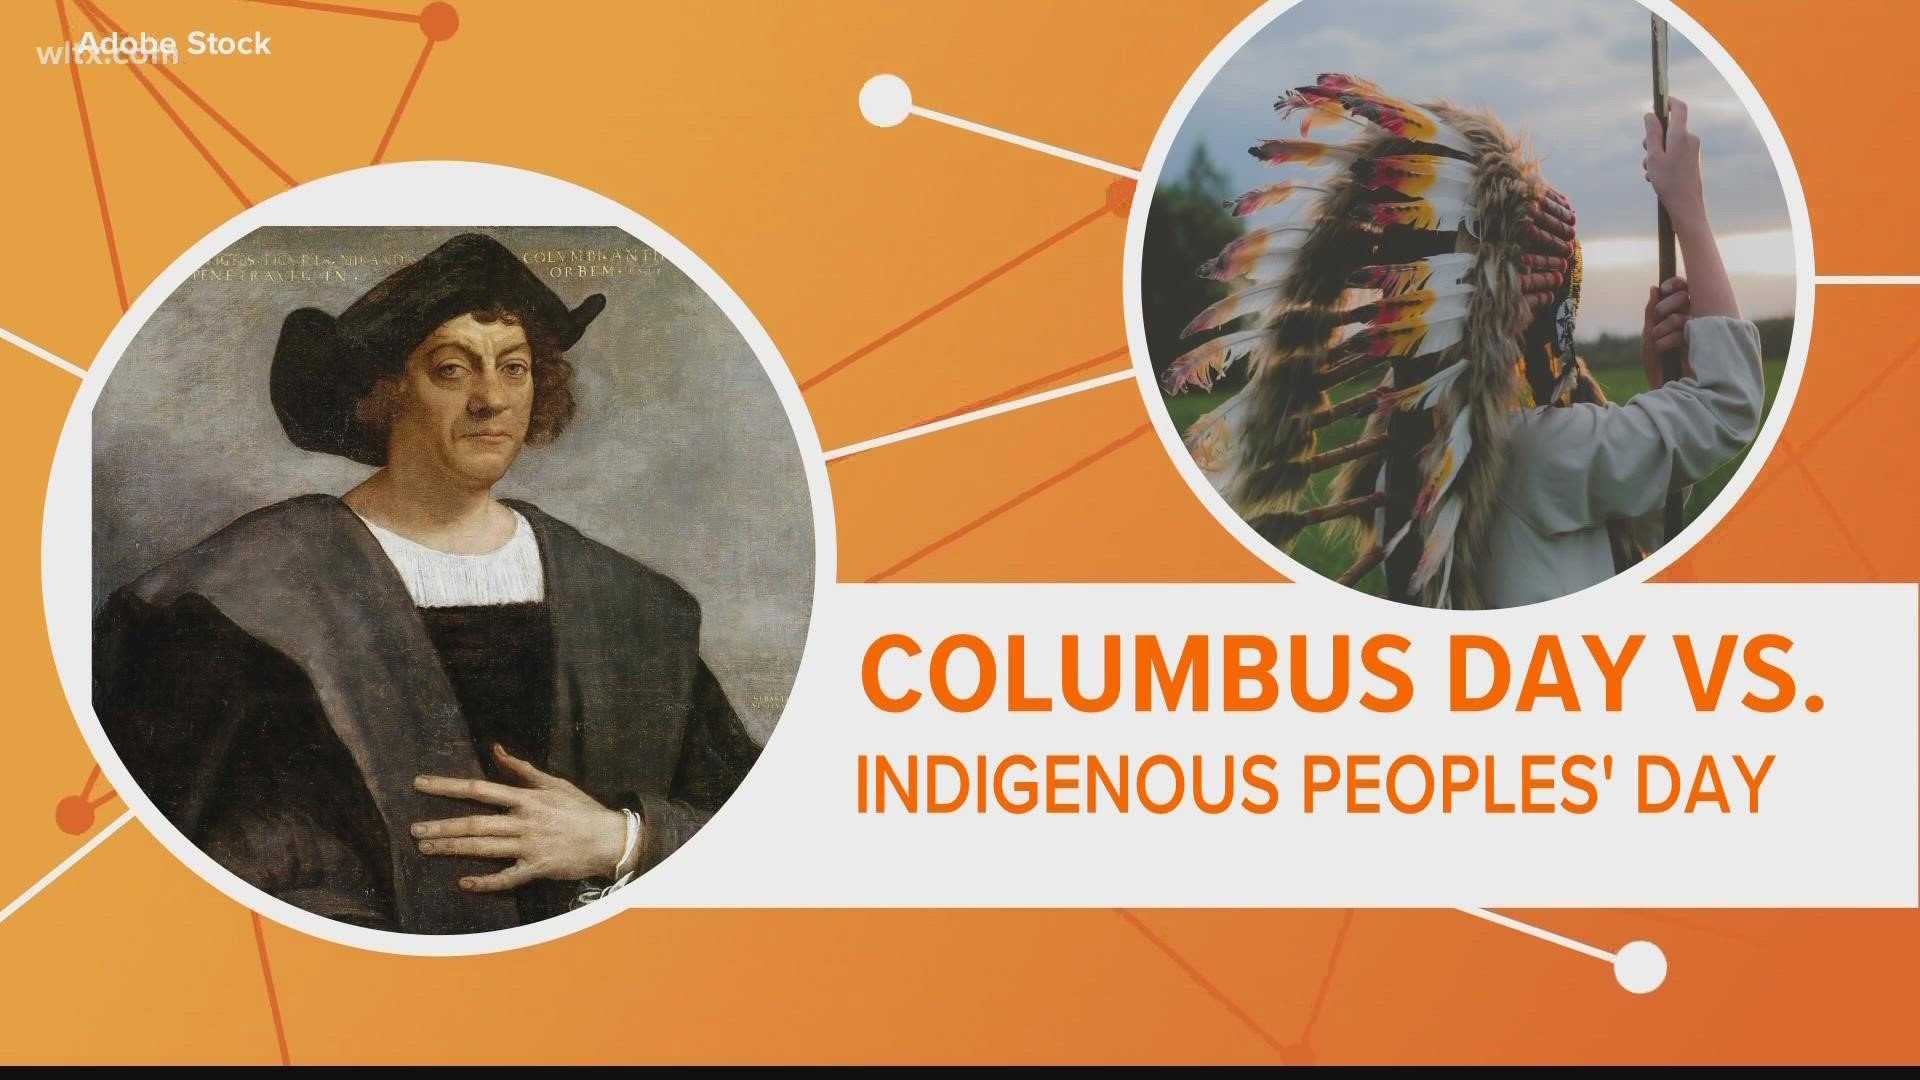 What Is Indigenous Peoples' Day?